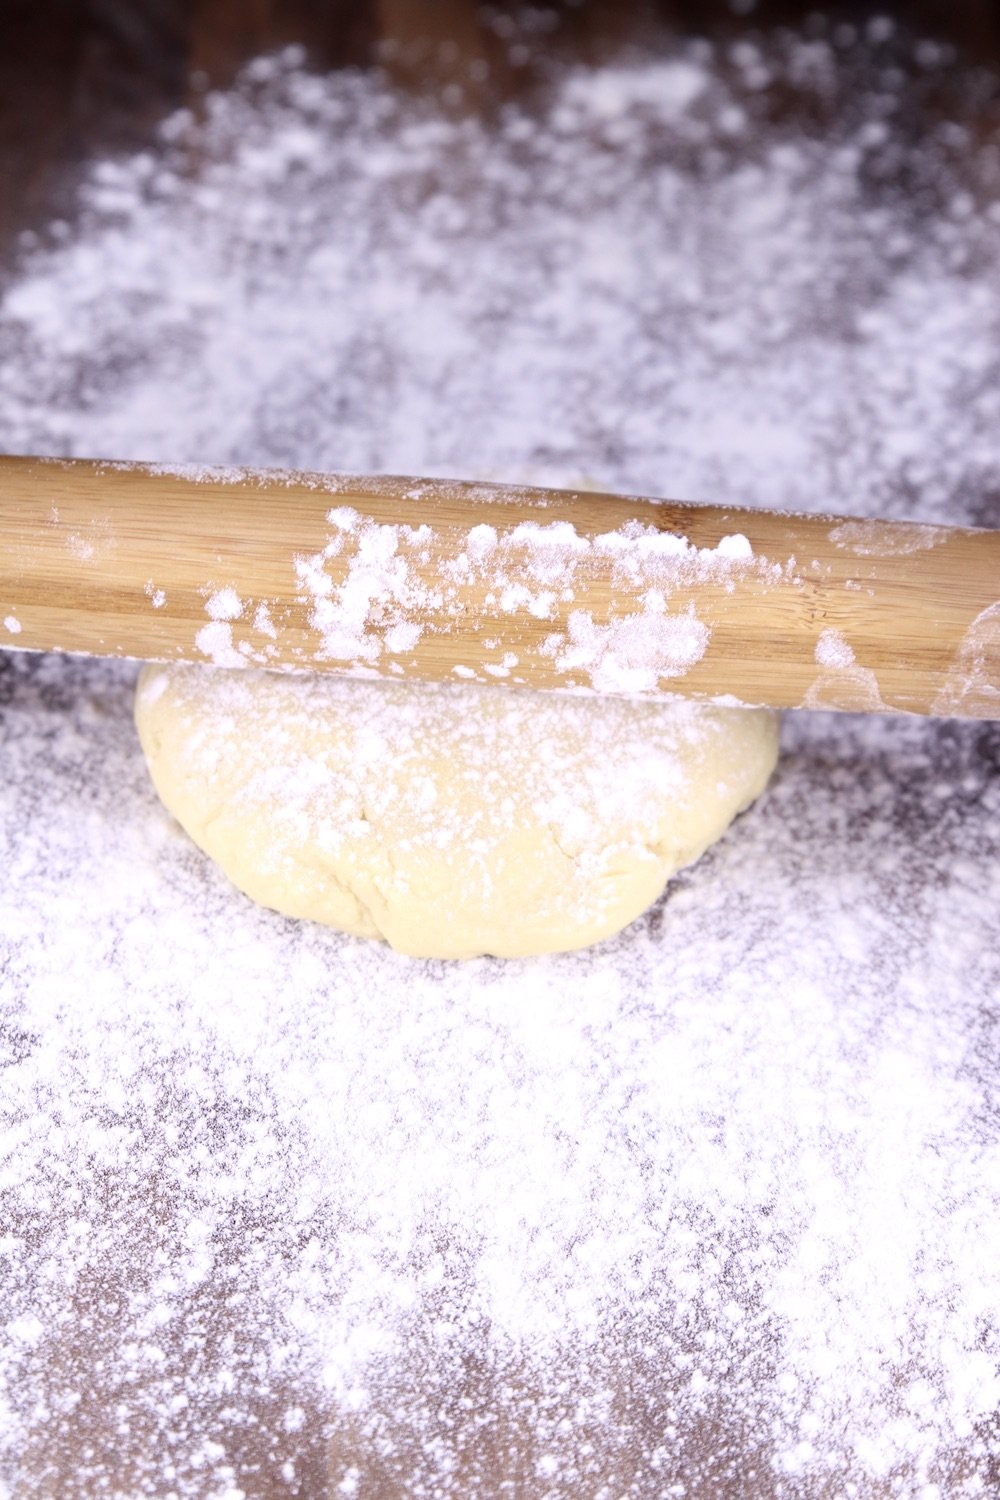 Rolling pin rolling sugar cookie dough on a well floured board